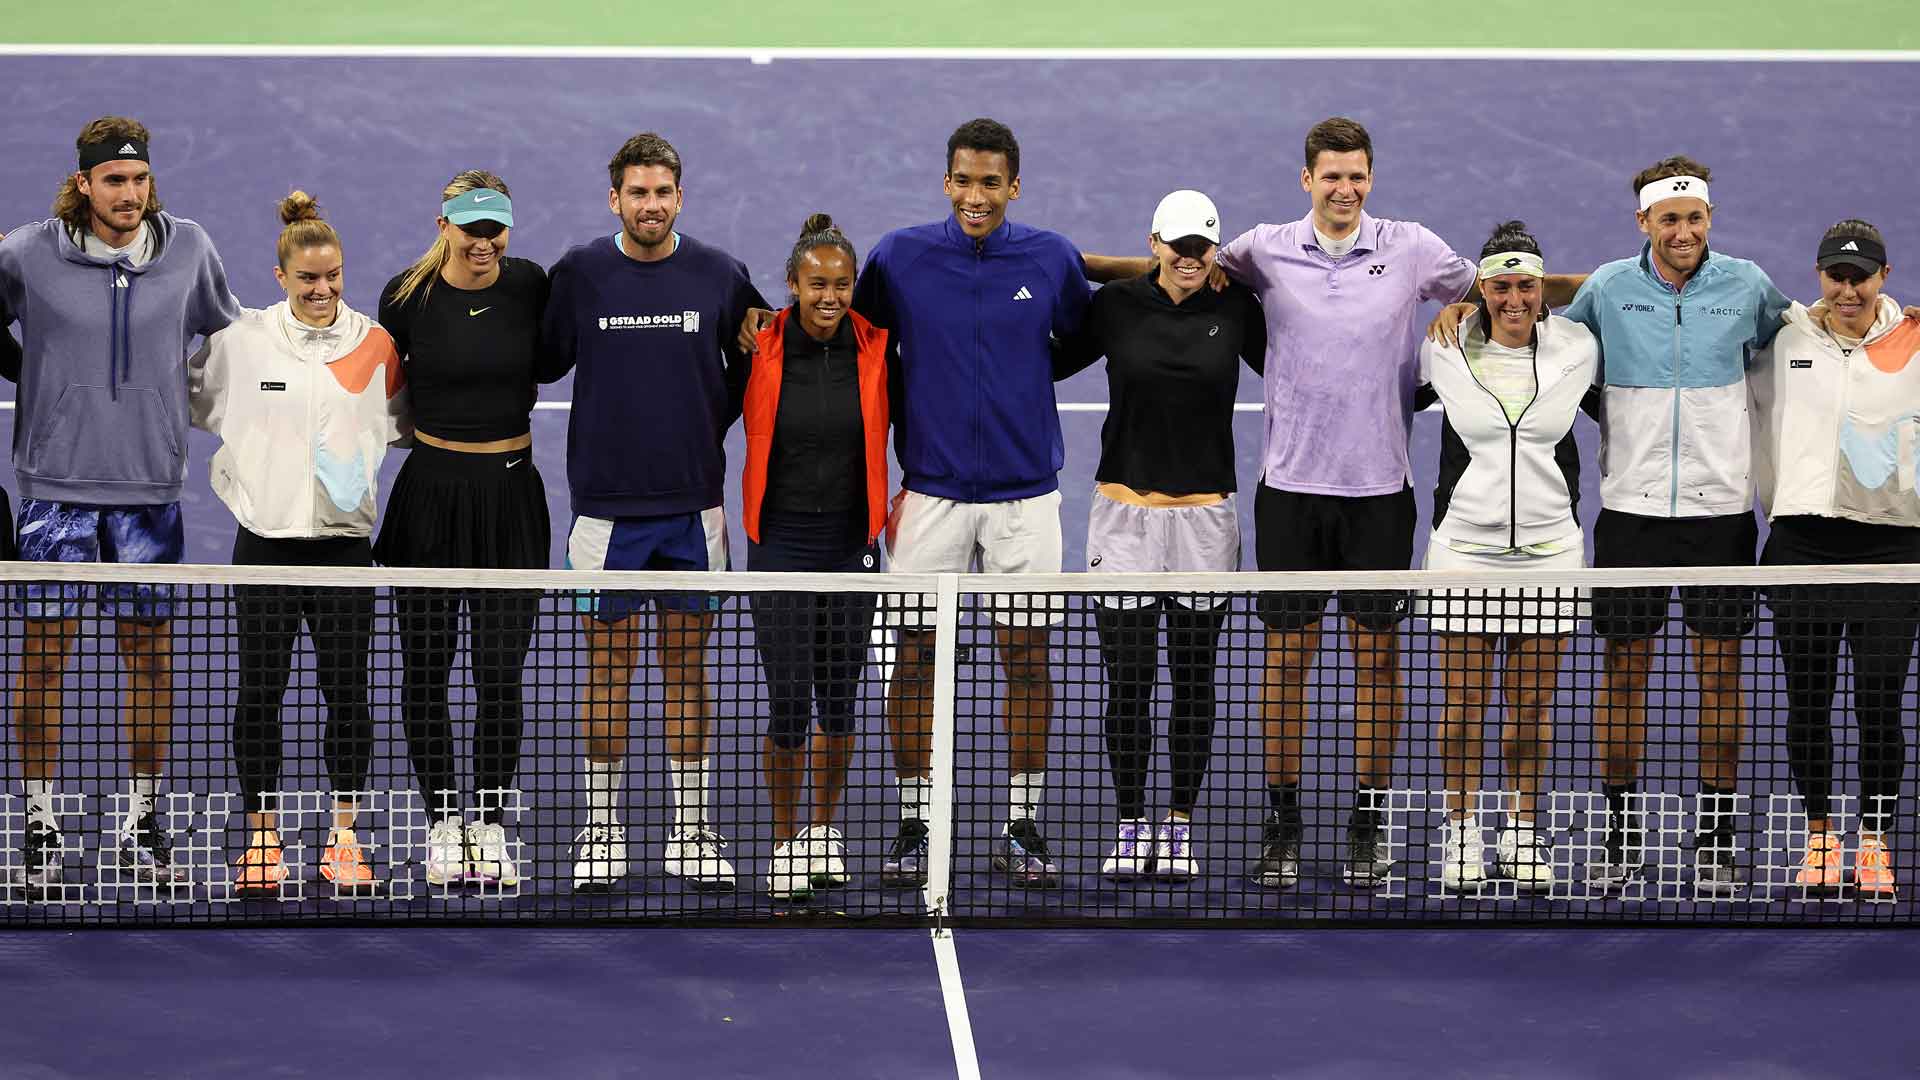 Stars of the ATP Tour and WTA Hologic Tour united on Tuesday night in Indian Wells for the Eisenhower Cup.